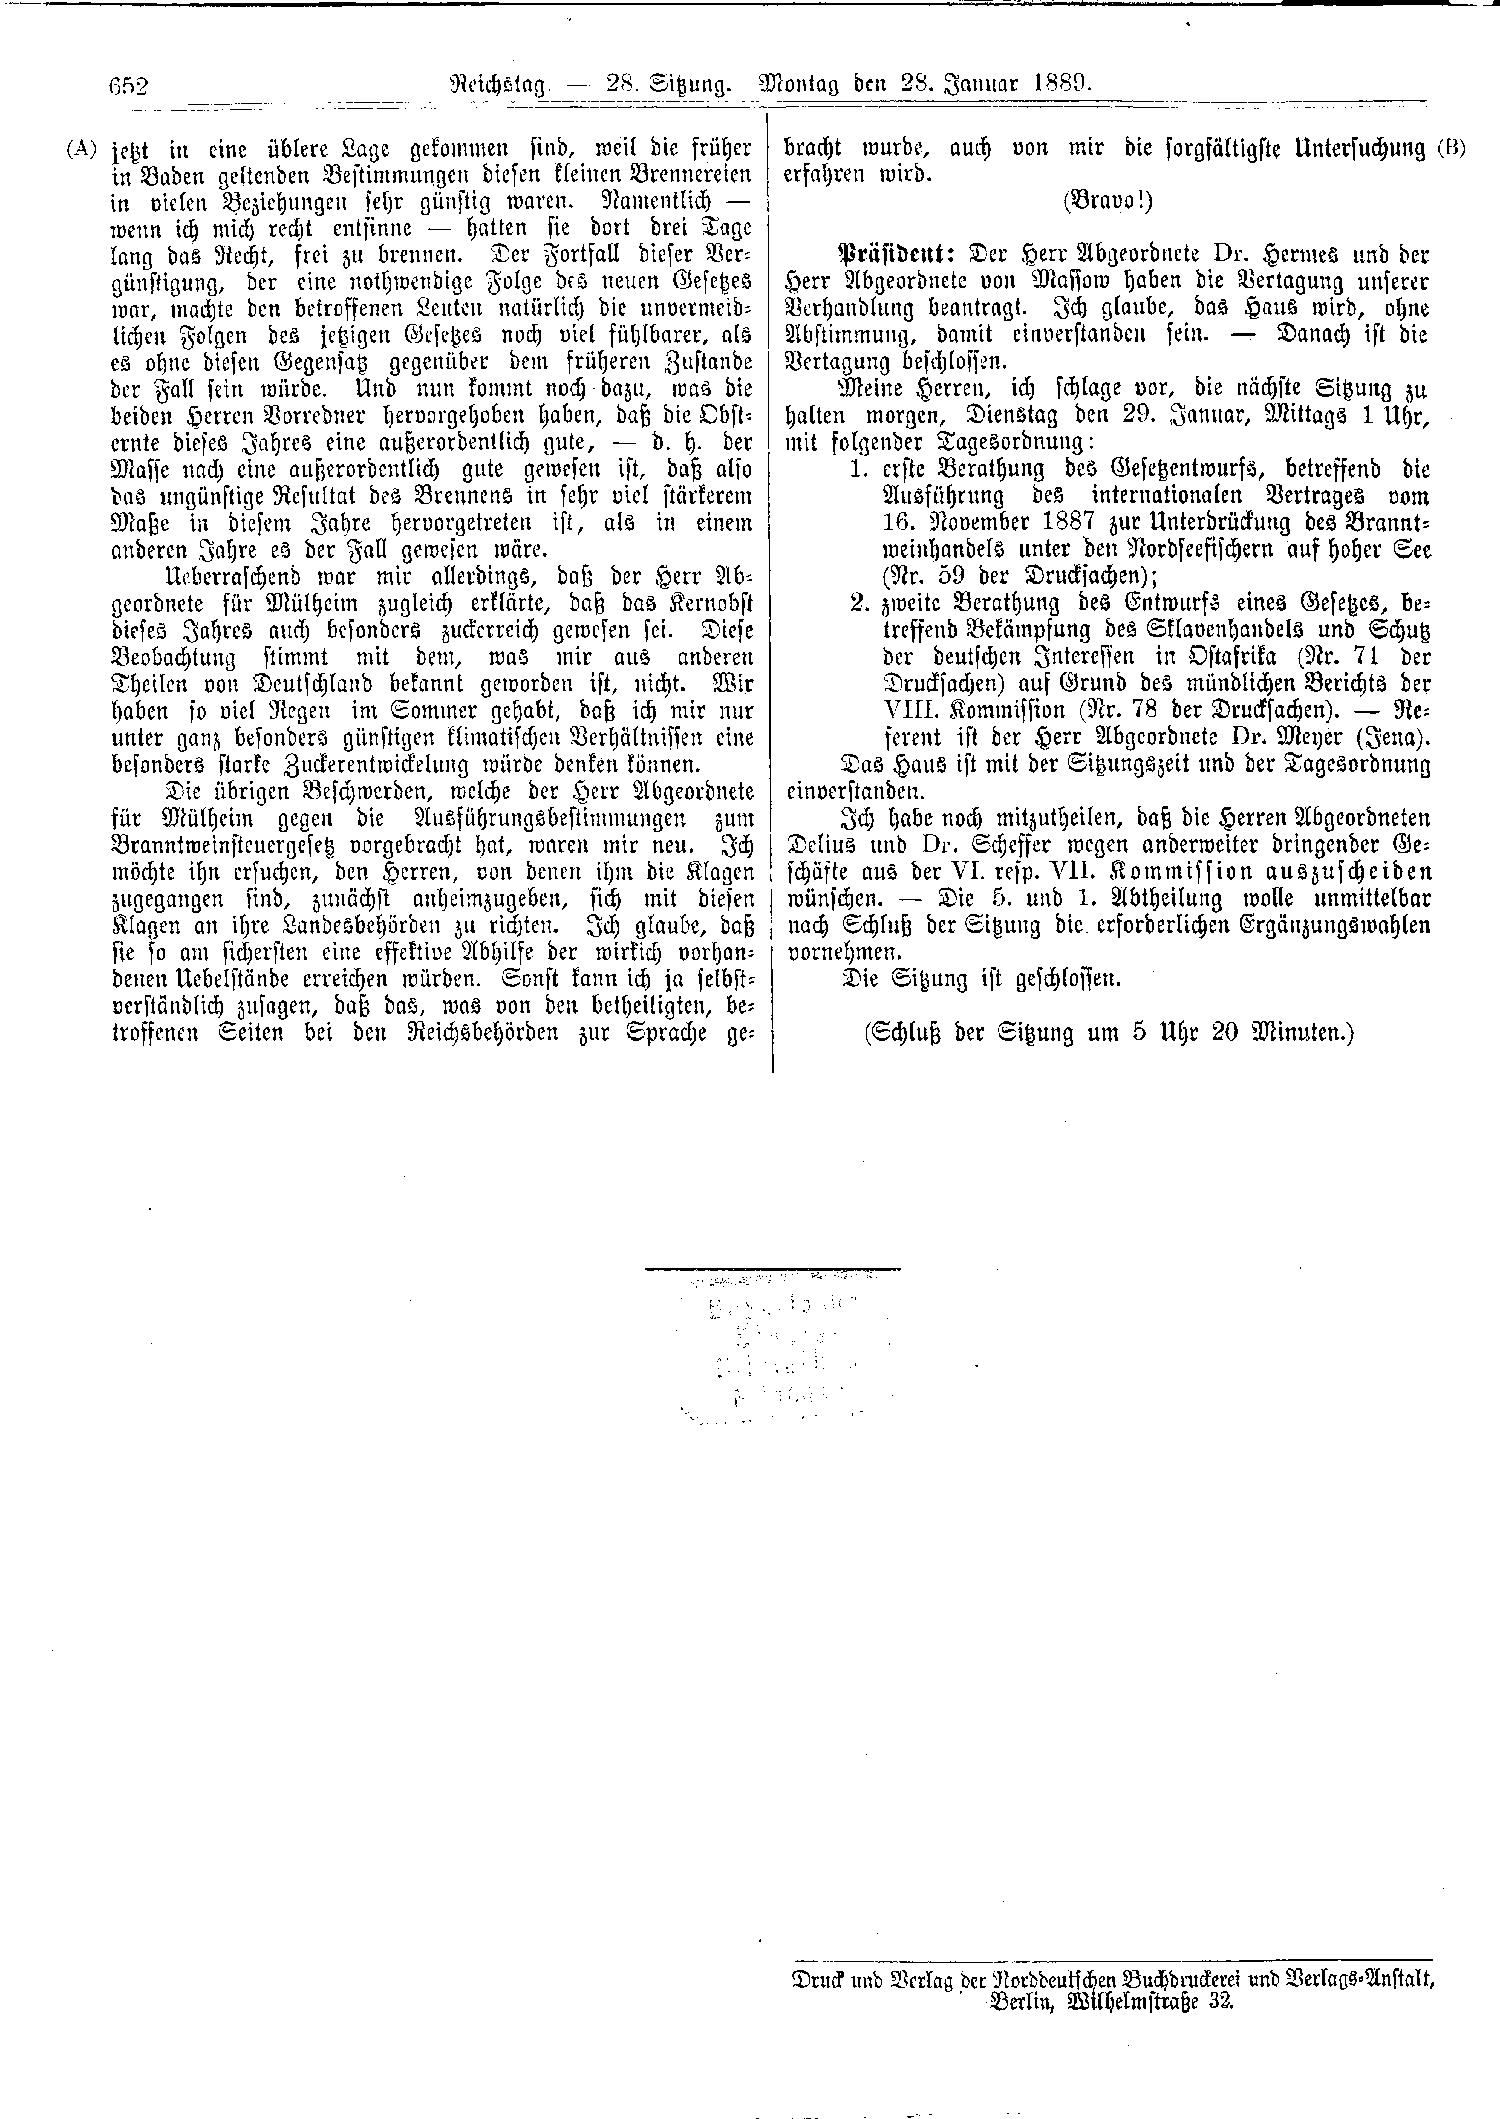 Scan of page 652